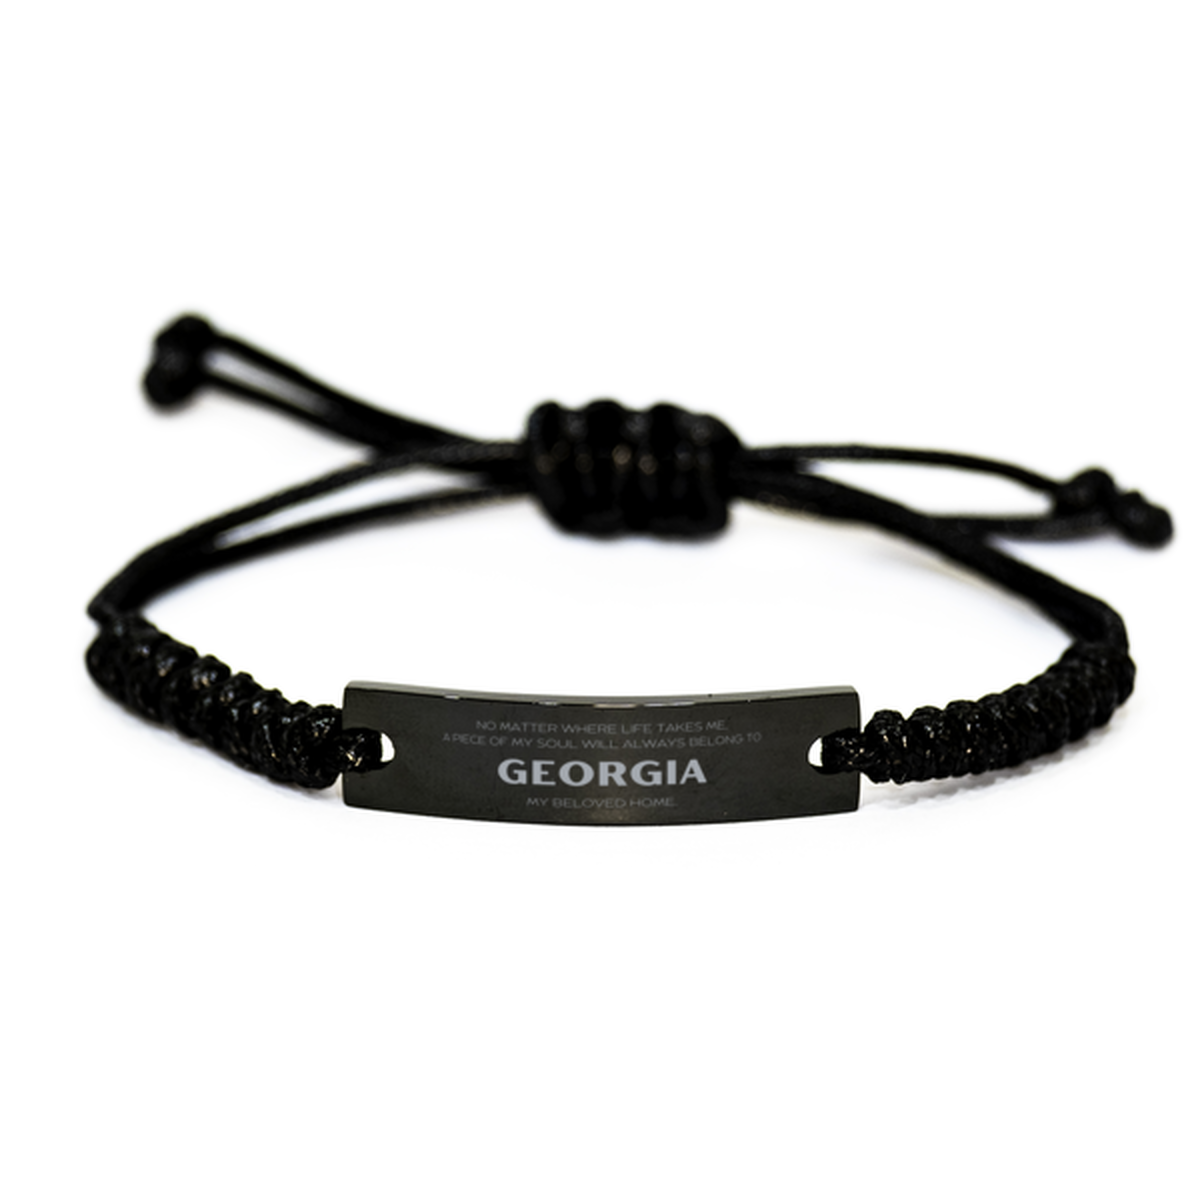 Love Georgia State Gifts, My soul will always belong to Georgia, Proud Black Rope Bracelet, Birthday Unique Gifts For Georgia Men, Women, Friends